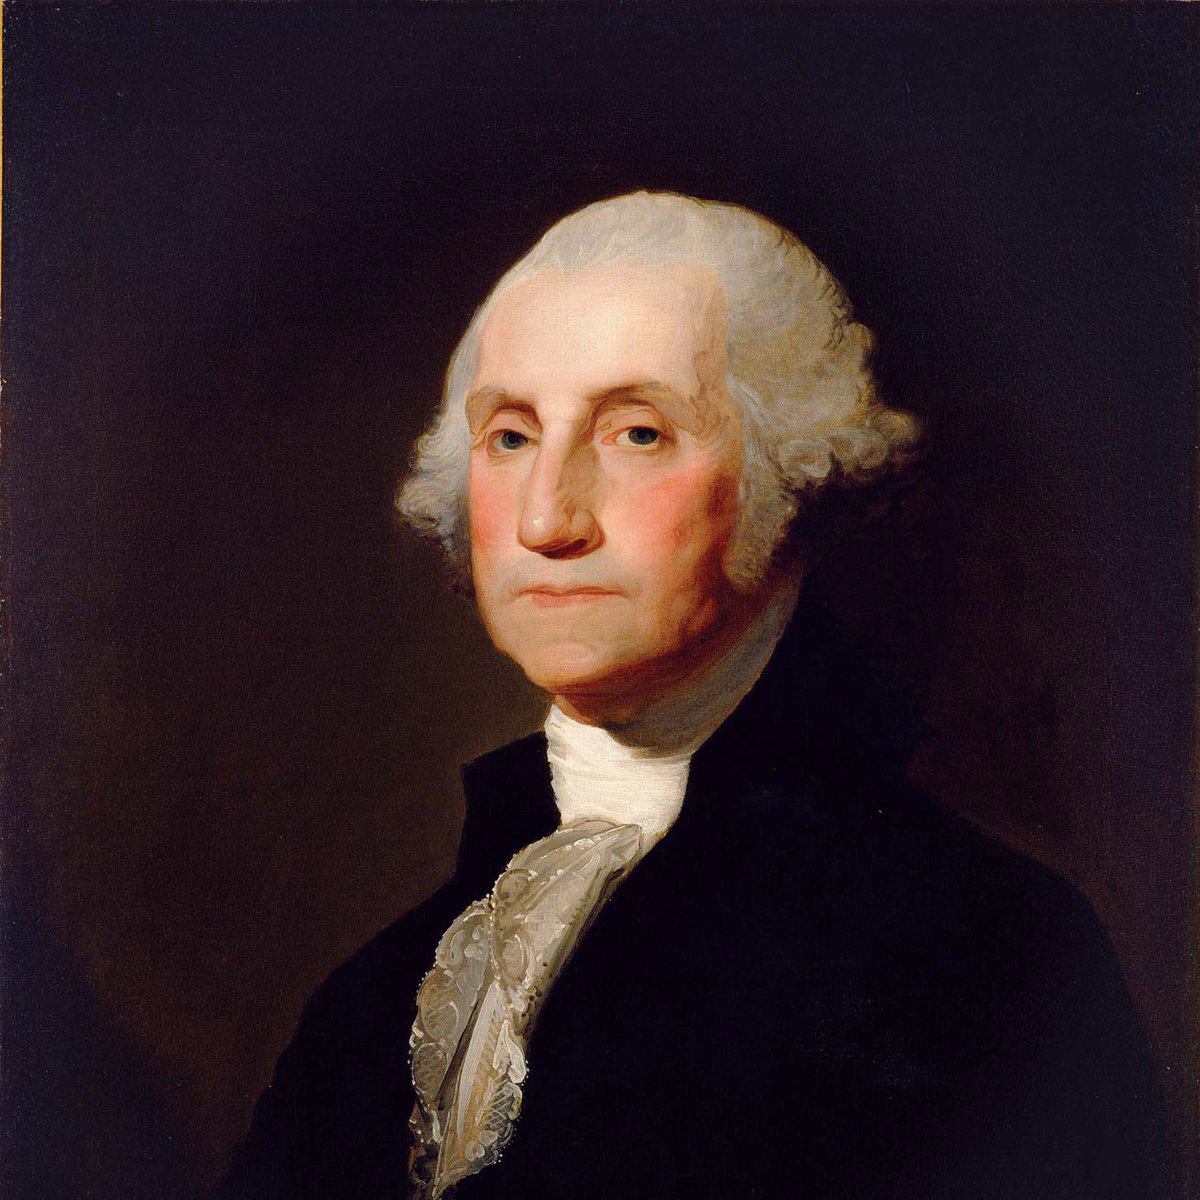 i painted these portraits of presidents before and after calling them out for being slave owners (a thread)george washington